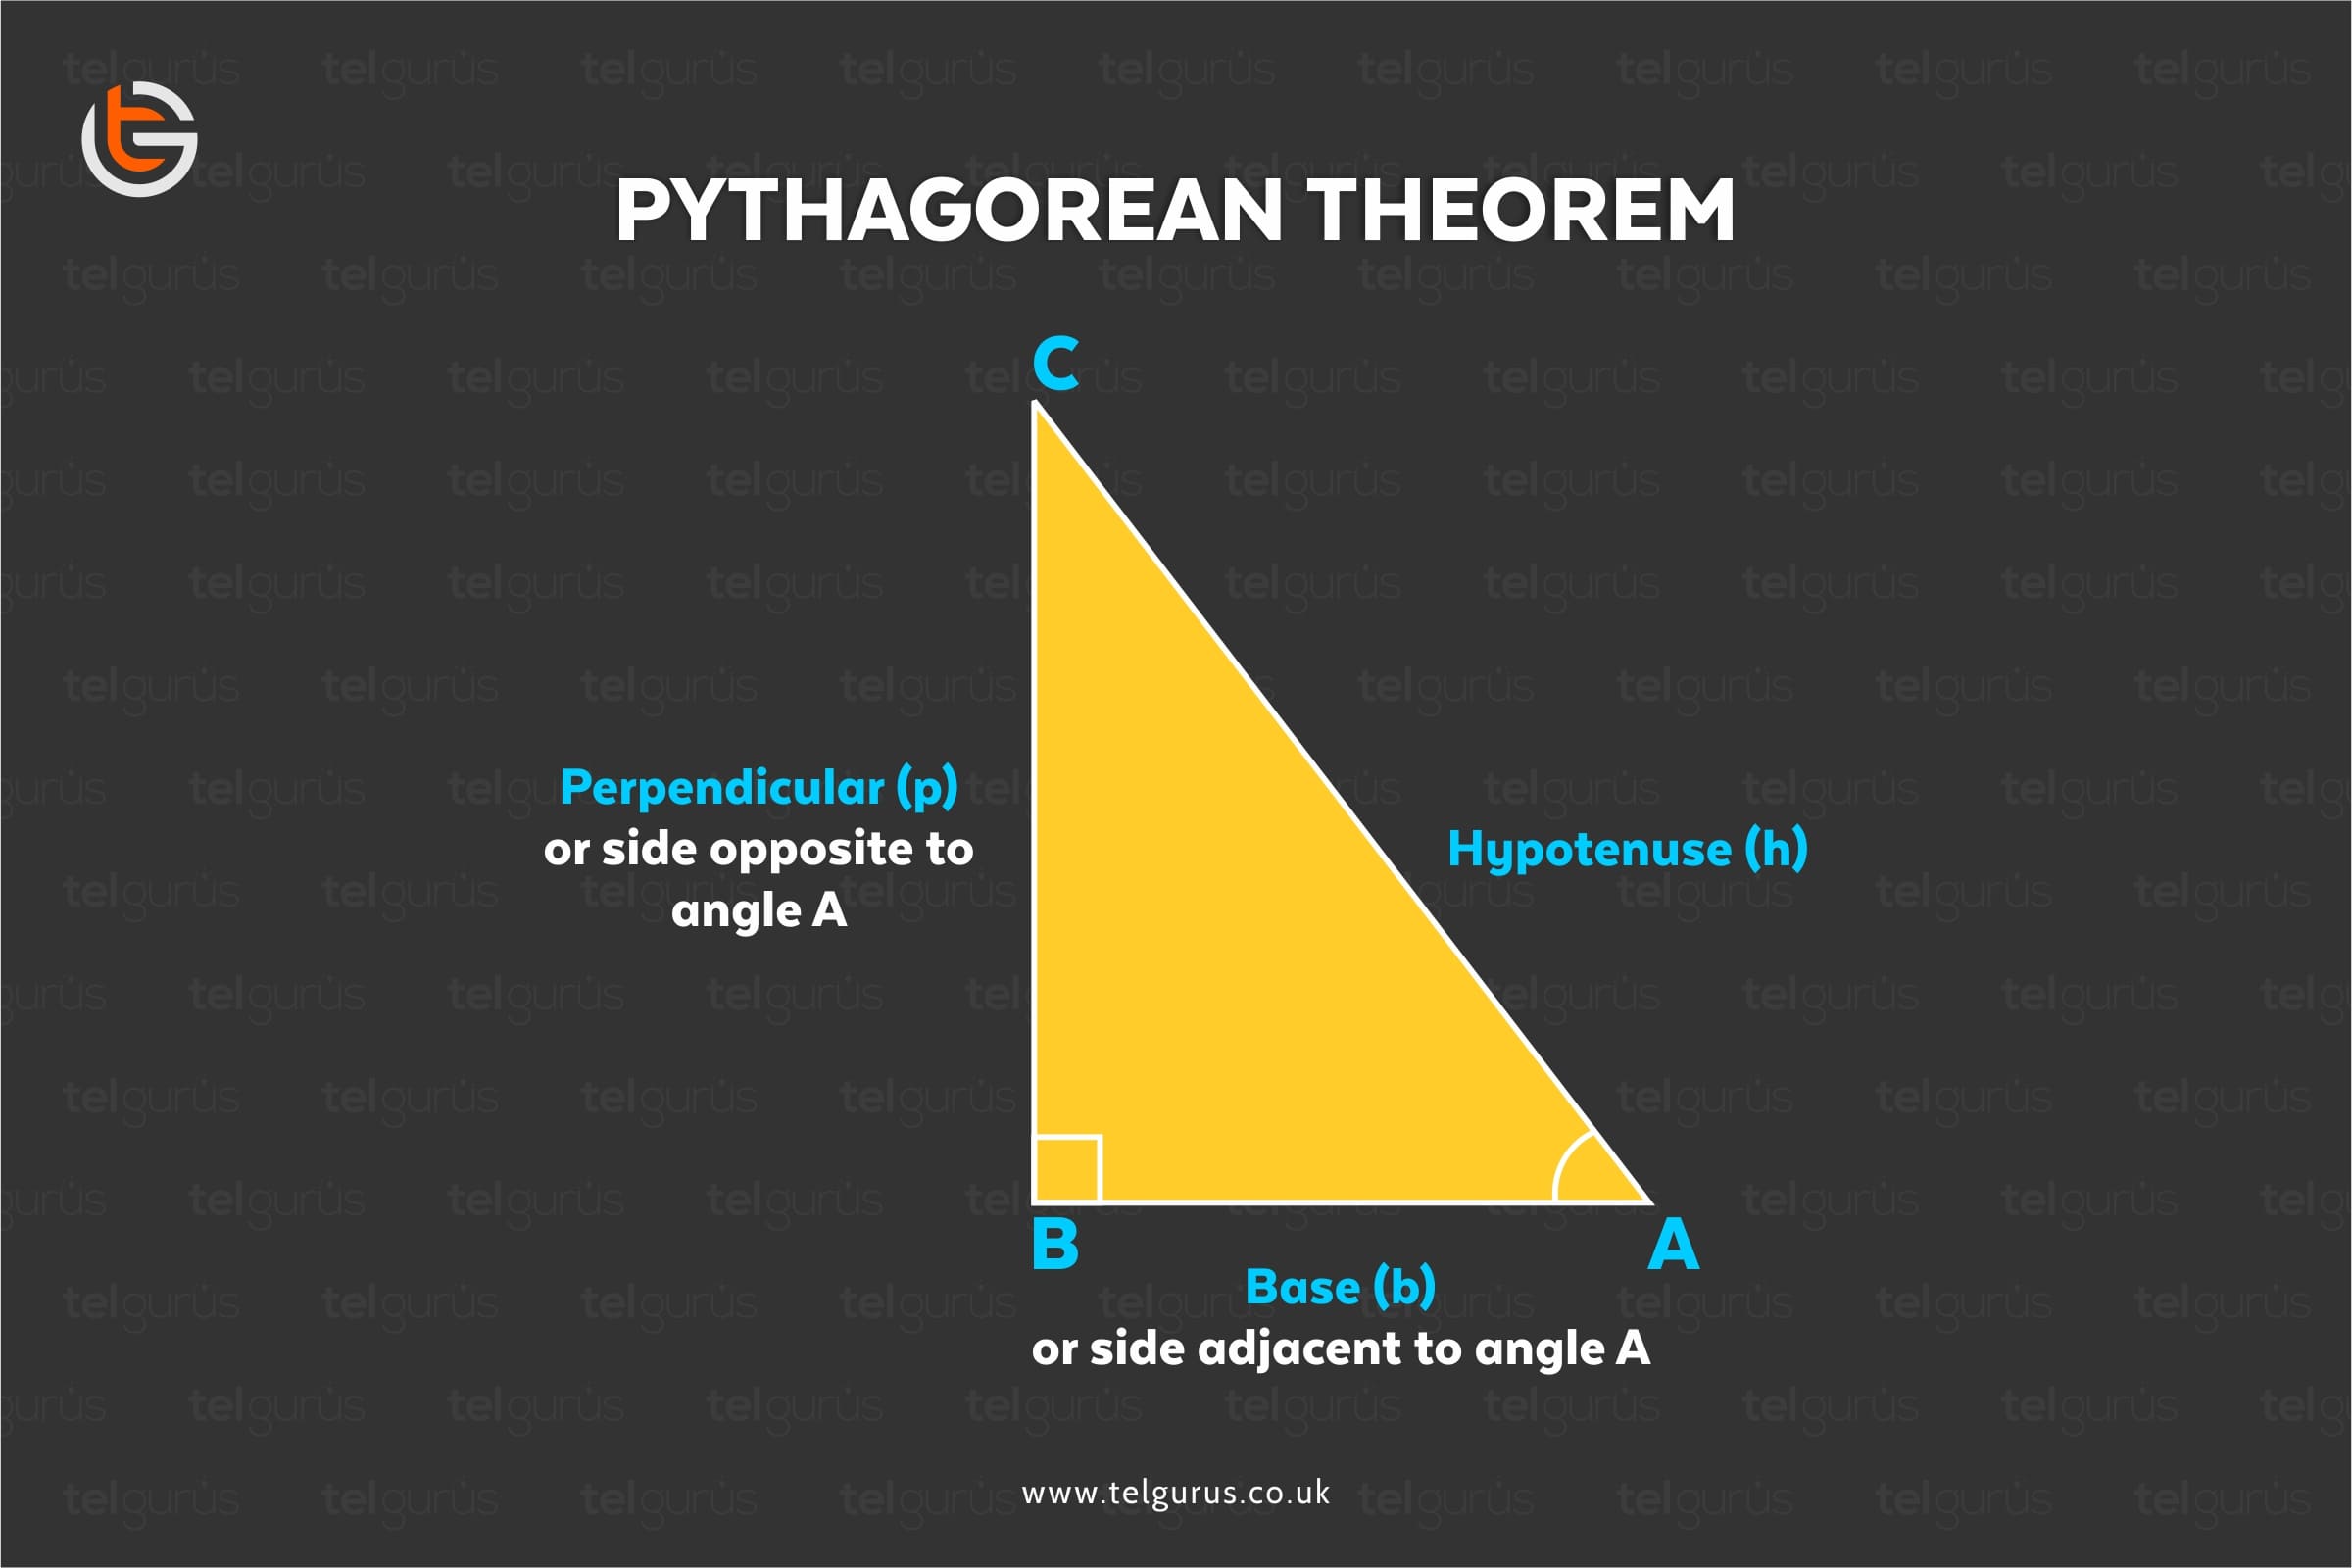 What is Pythagoras Theorem?